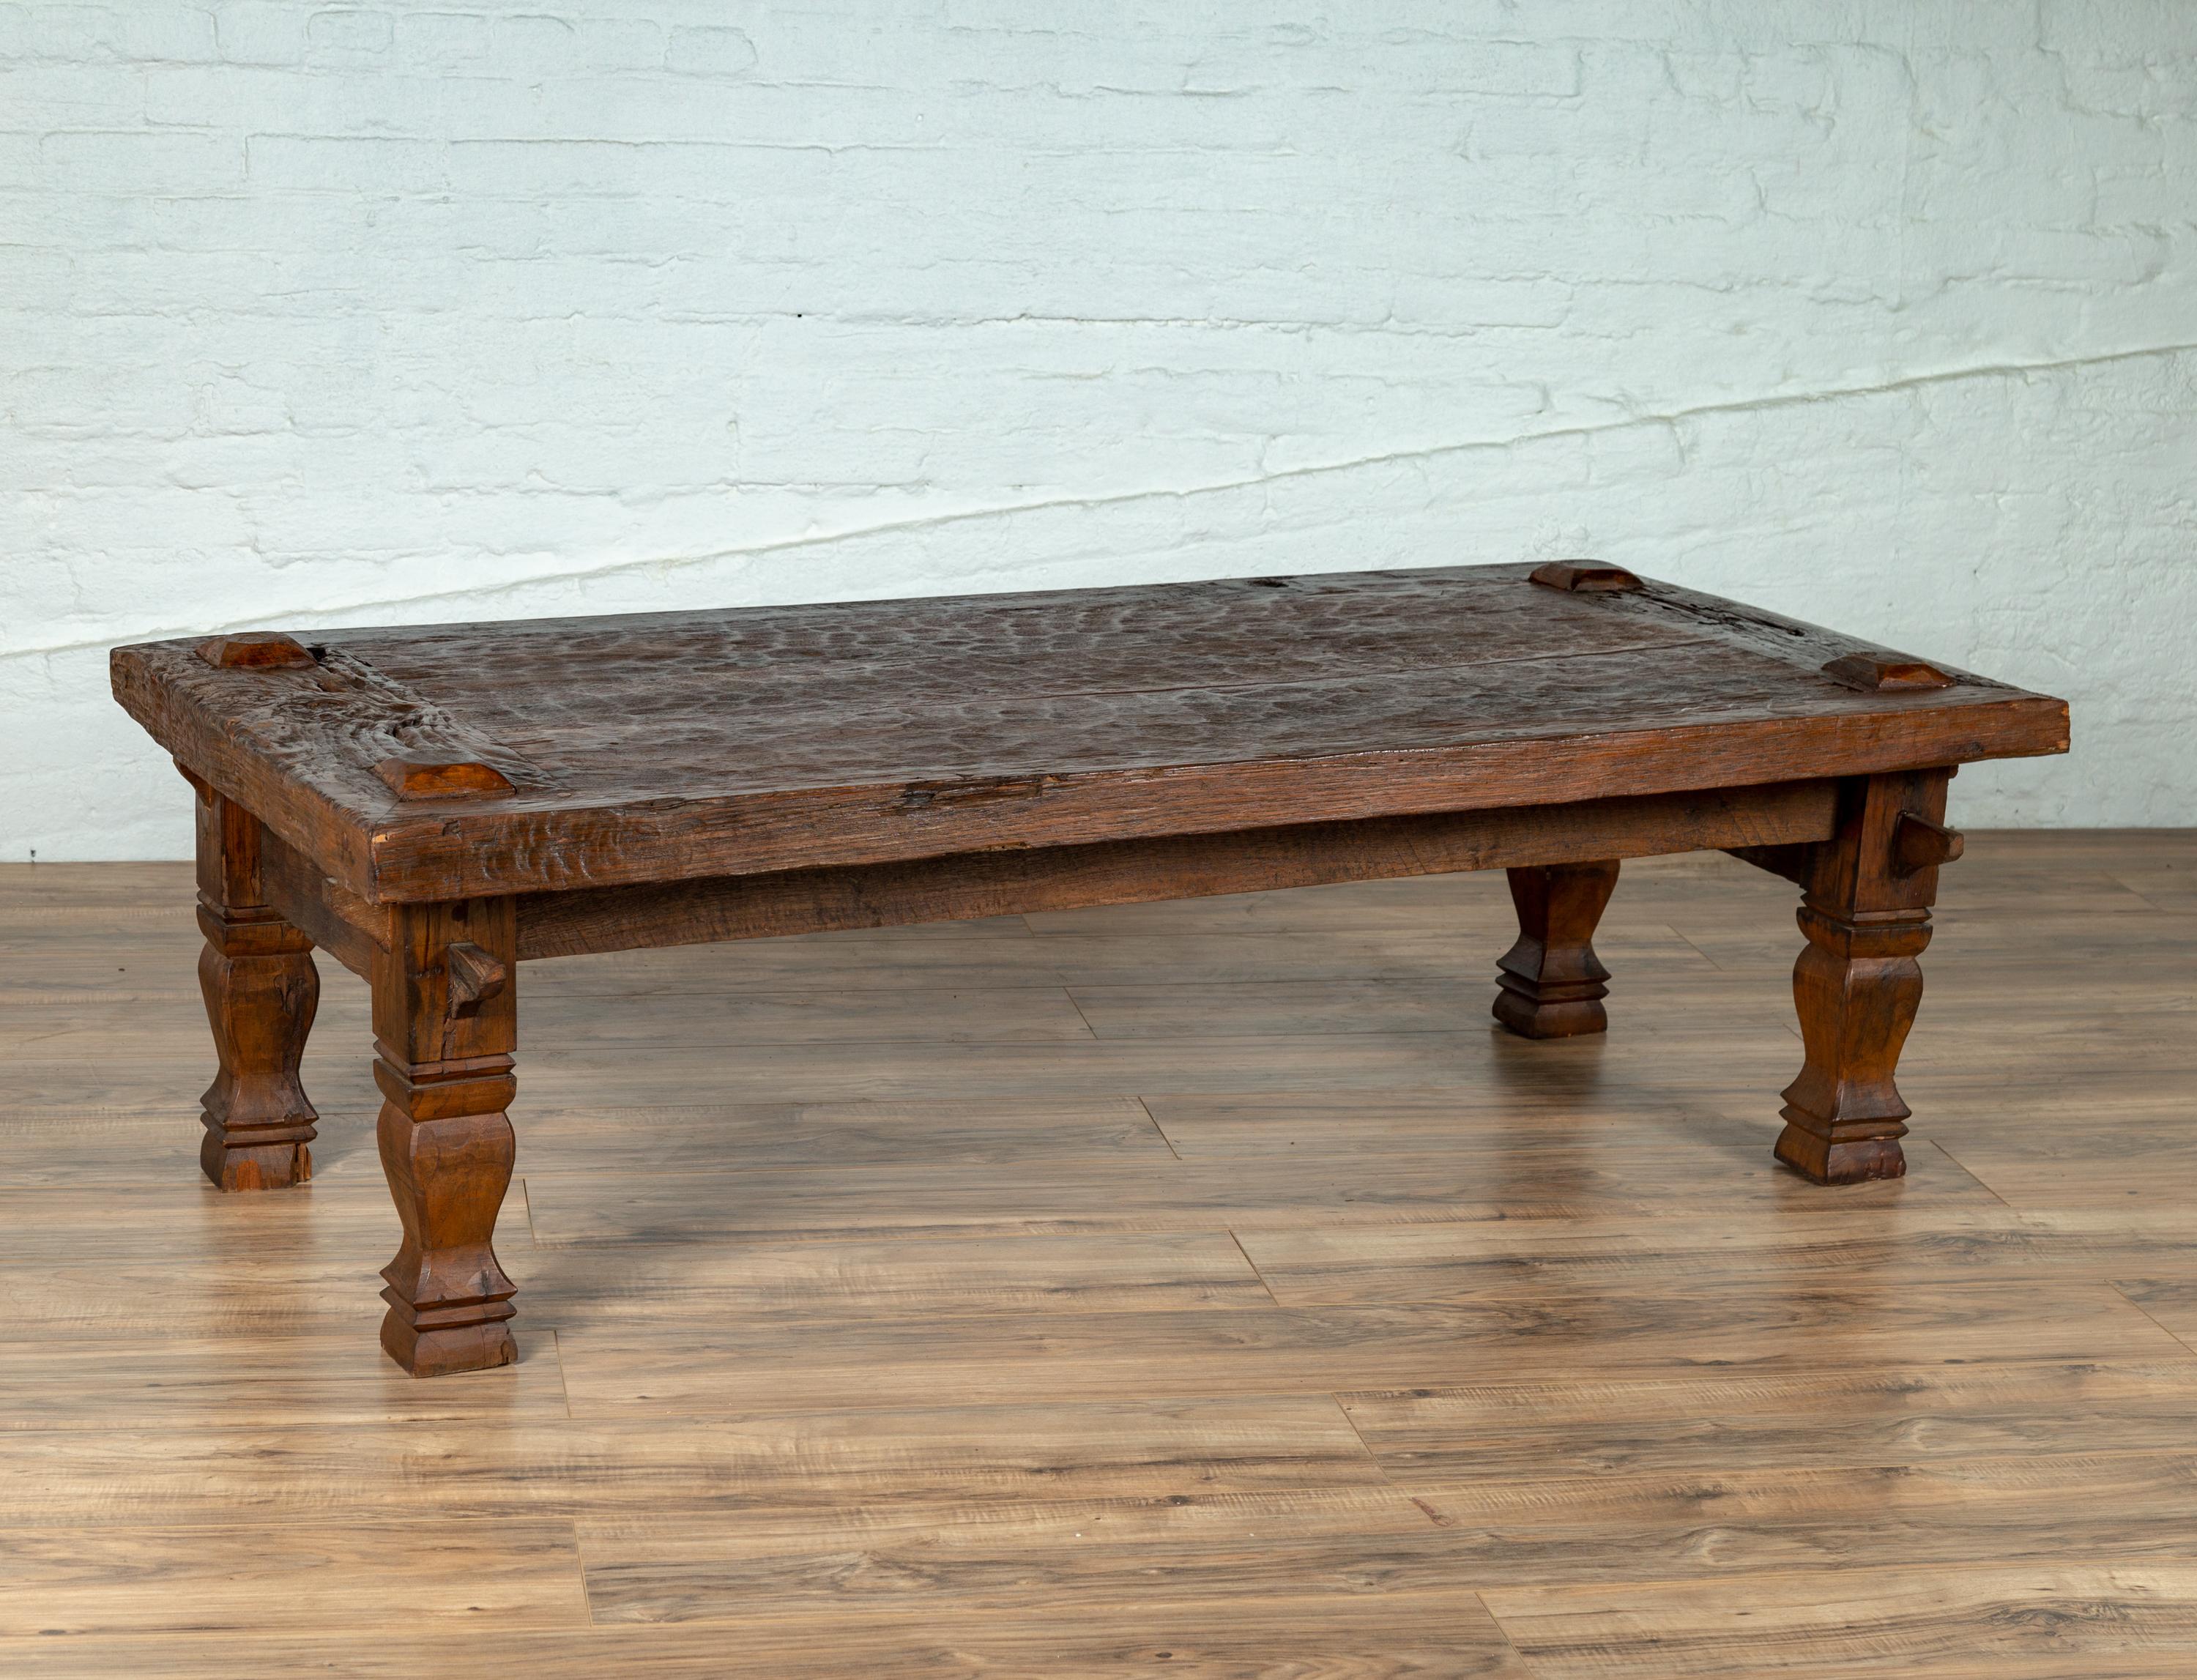 Rustic Antique Javanese Teak Coffee Table with Textured Top and Baluster Legs 2